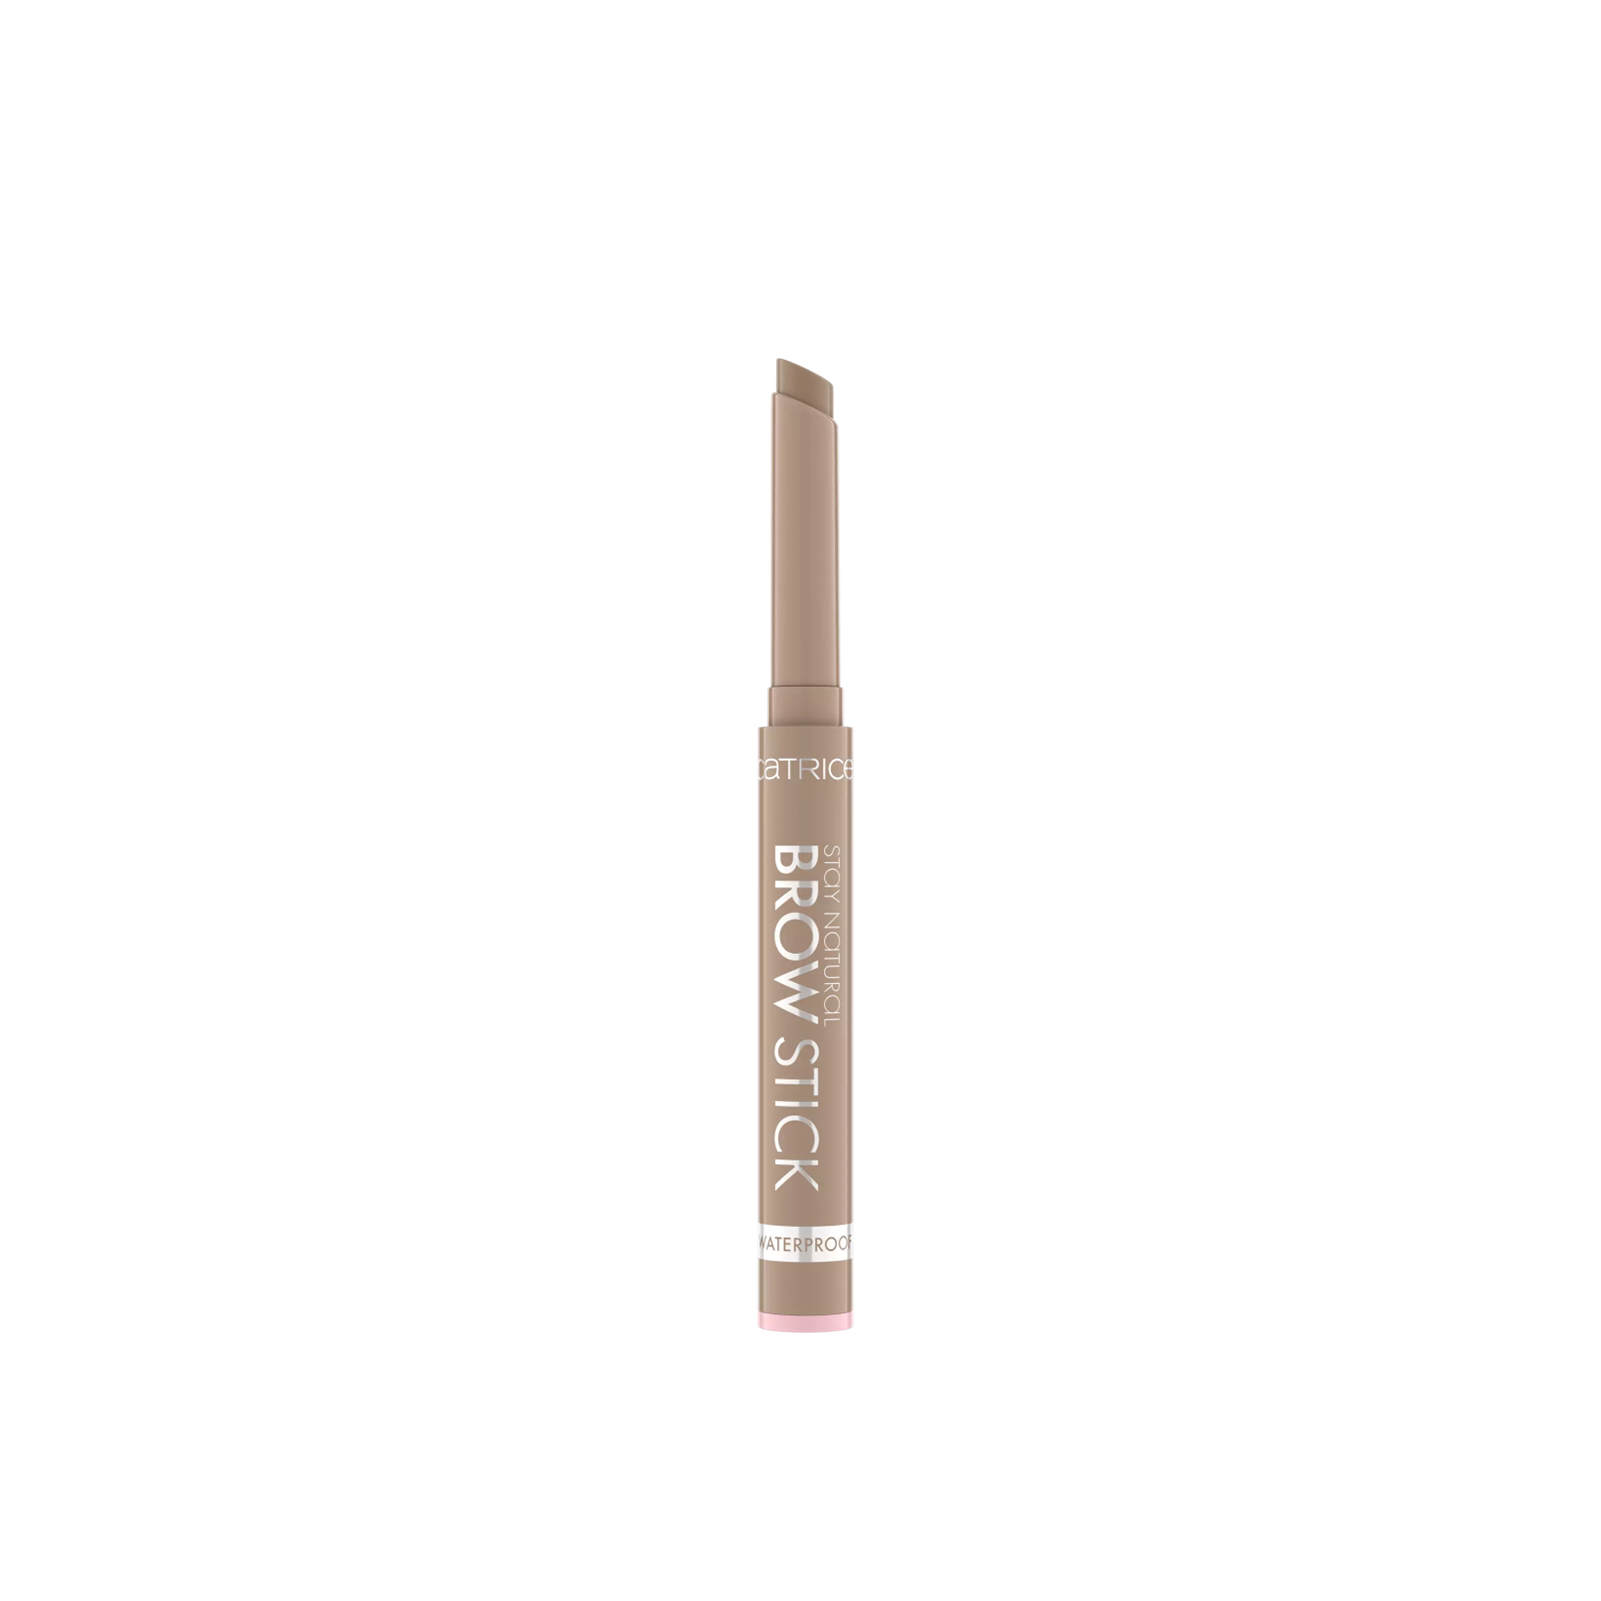 Buy Catrice Stay Natural Waterproof Brow Stick 020 Soft Medium Brown 1g  (0.03 oz) · USA